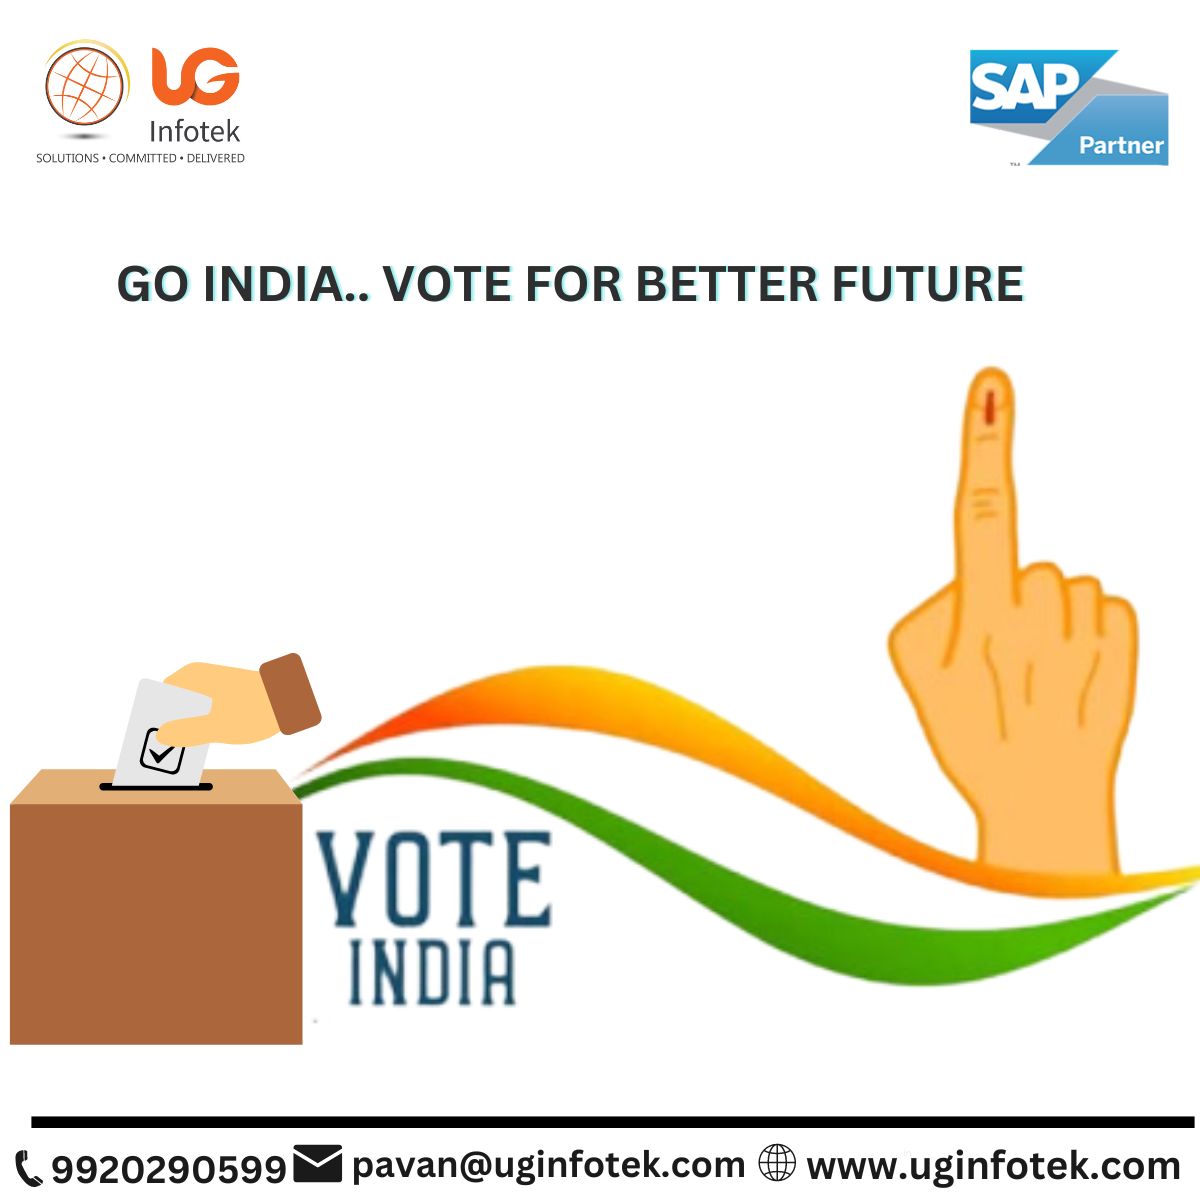 SME Leaders, UG Infotek LLP urges you to vote in the 2024 elections to shape policies supporting business growth. Discover how our SAP Business One solutions can streamline your operations and drive success.
**Go Vote Mumbai 2024!**
#GoVoteMumbai #SMEsForChange #Election2024